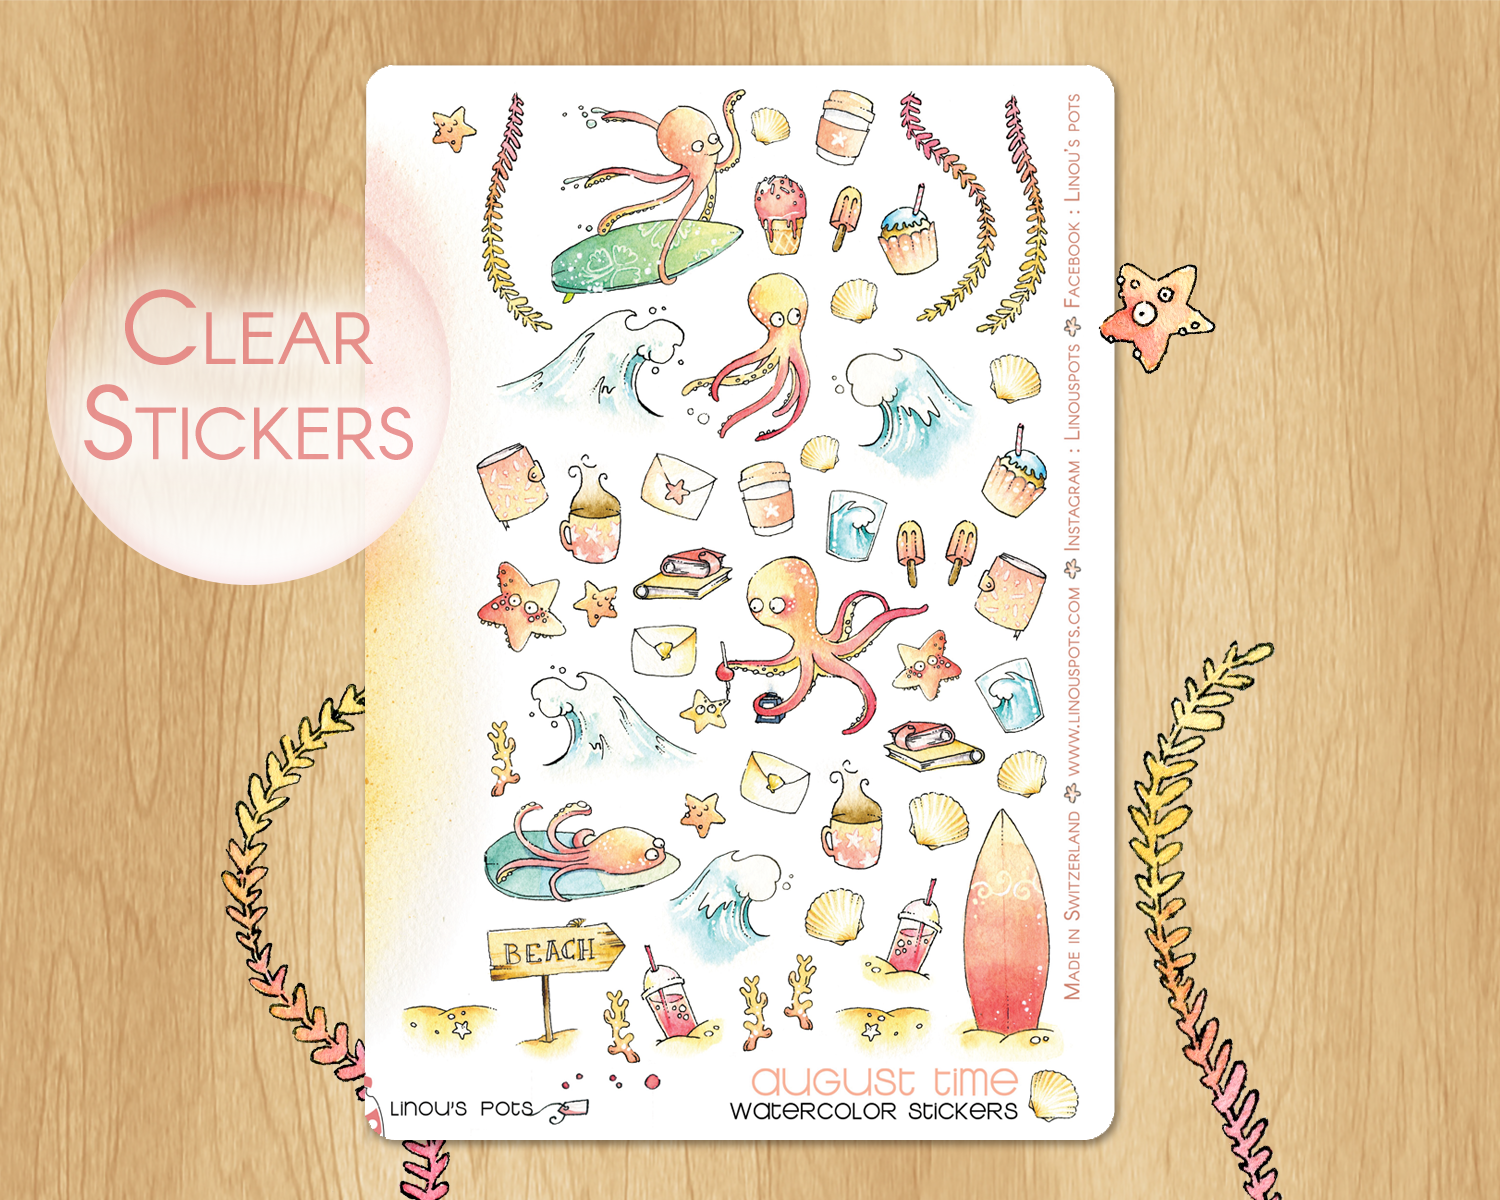 Watercolor decorative stickers with octopuses